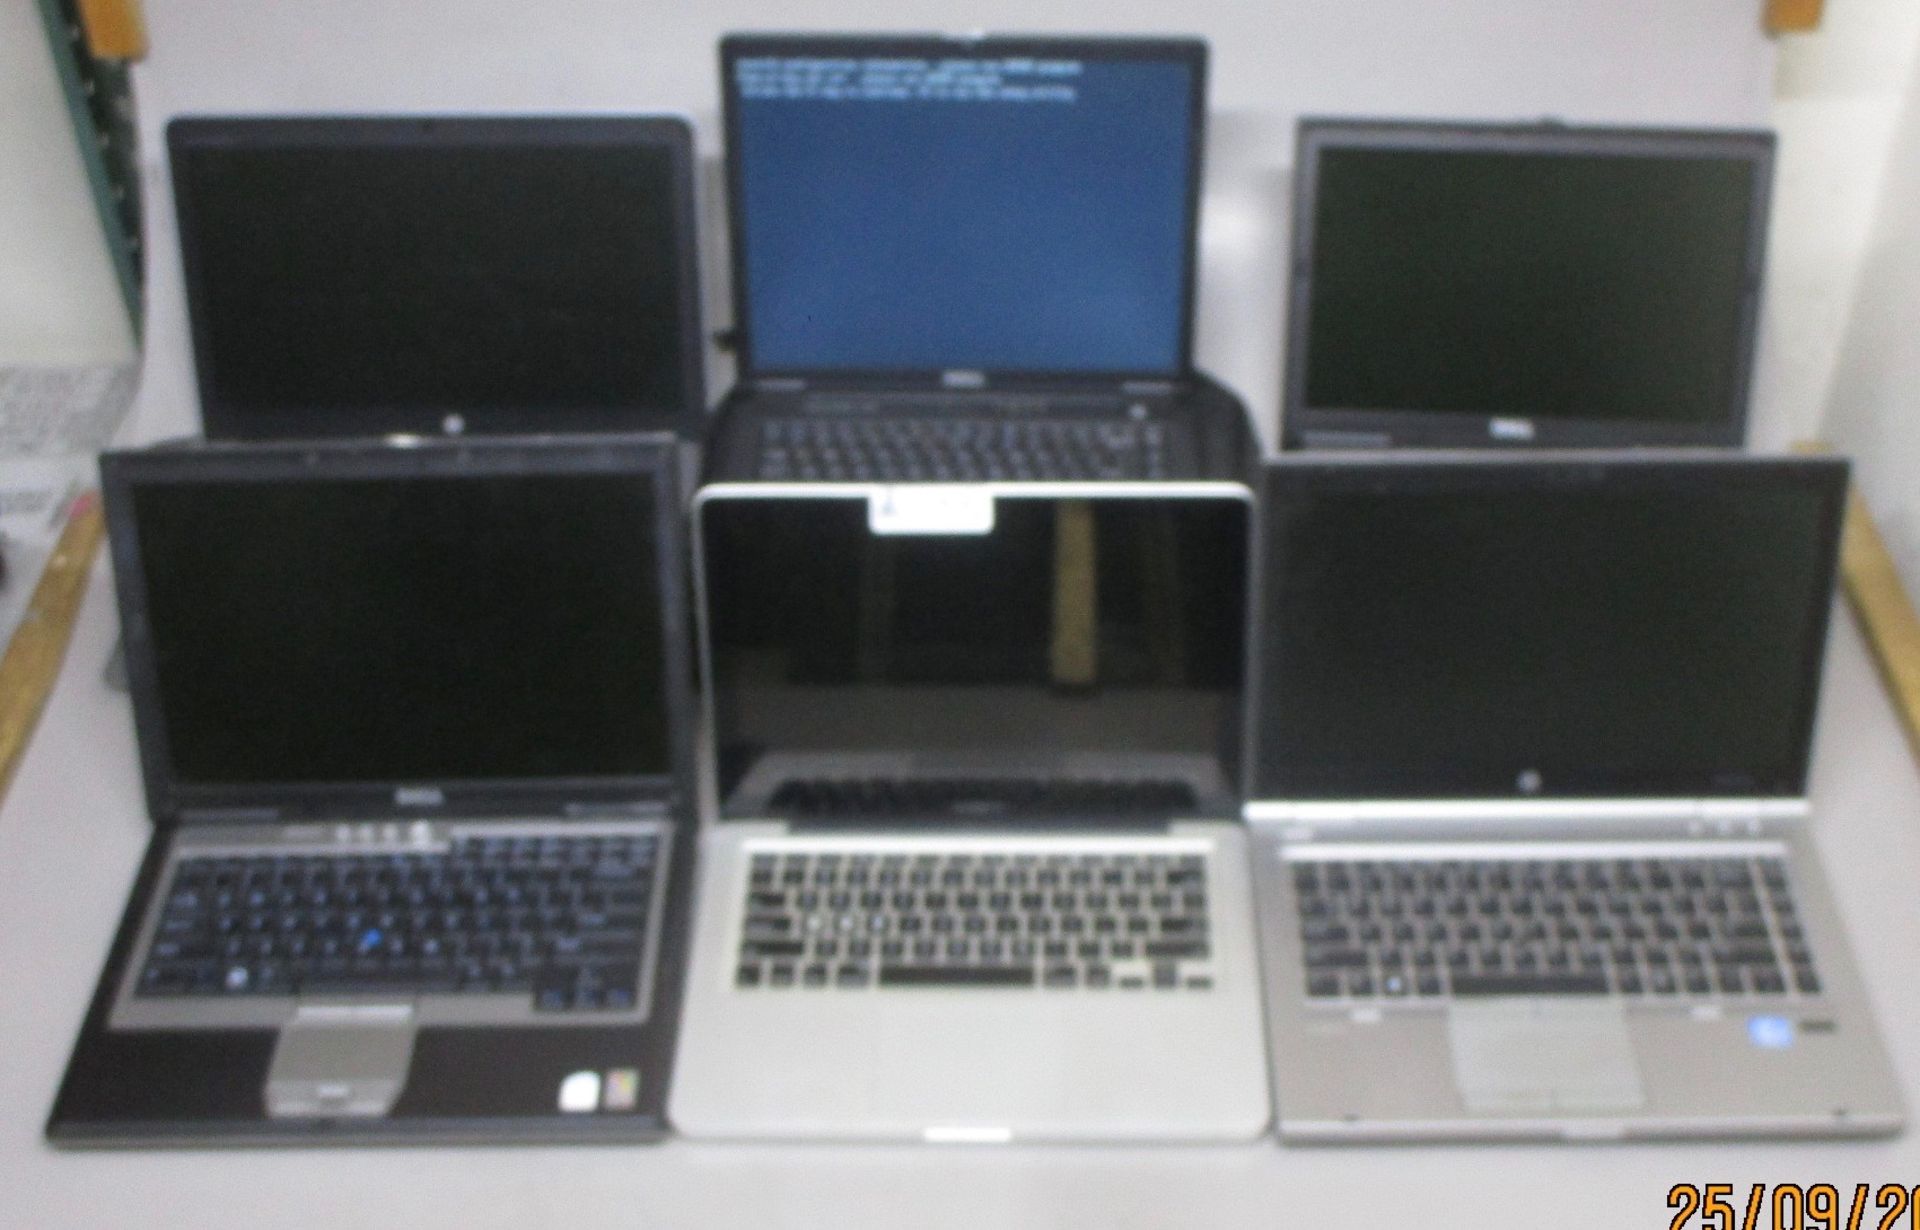 LOT OF 6 LAPTOPS PARTS AND REPAIR